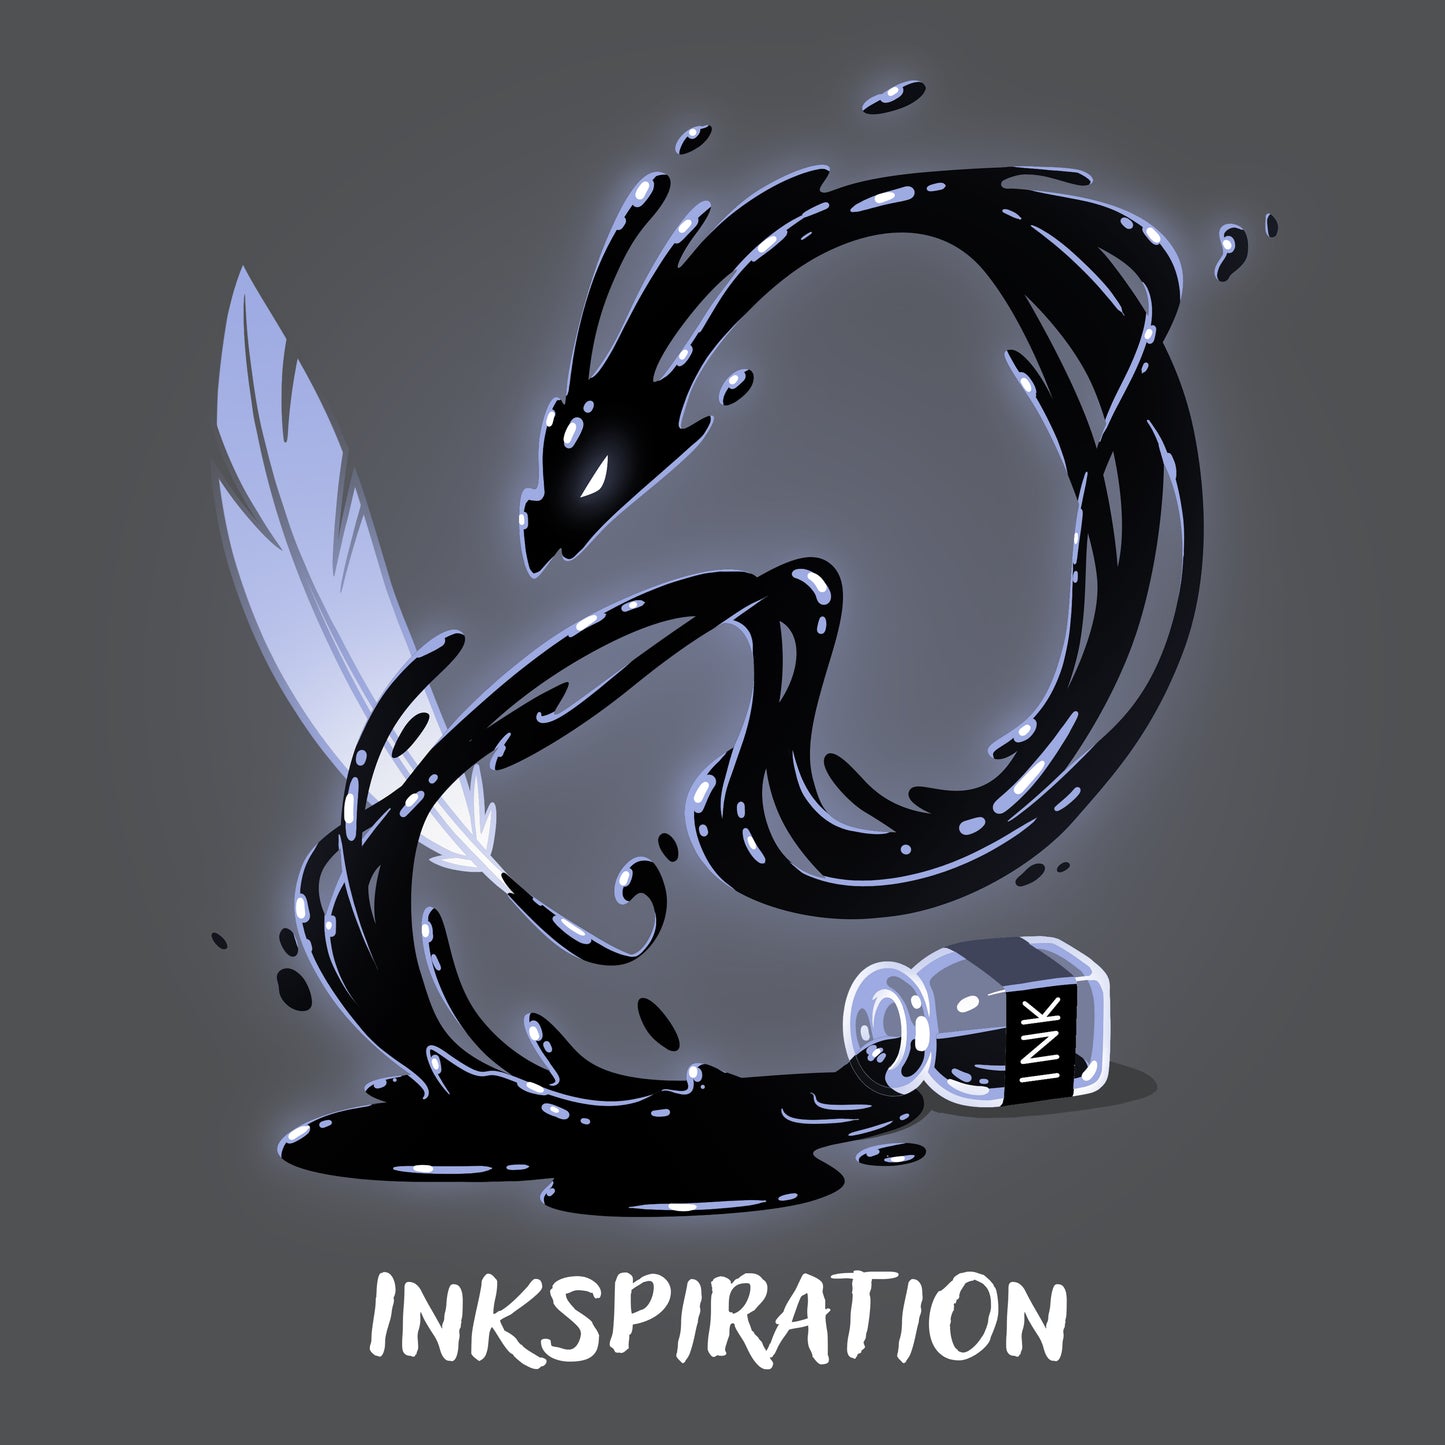 An image of a dragon in the process of creating an Inkspiration artwork on a black background by TeeTurtle.